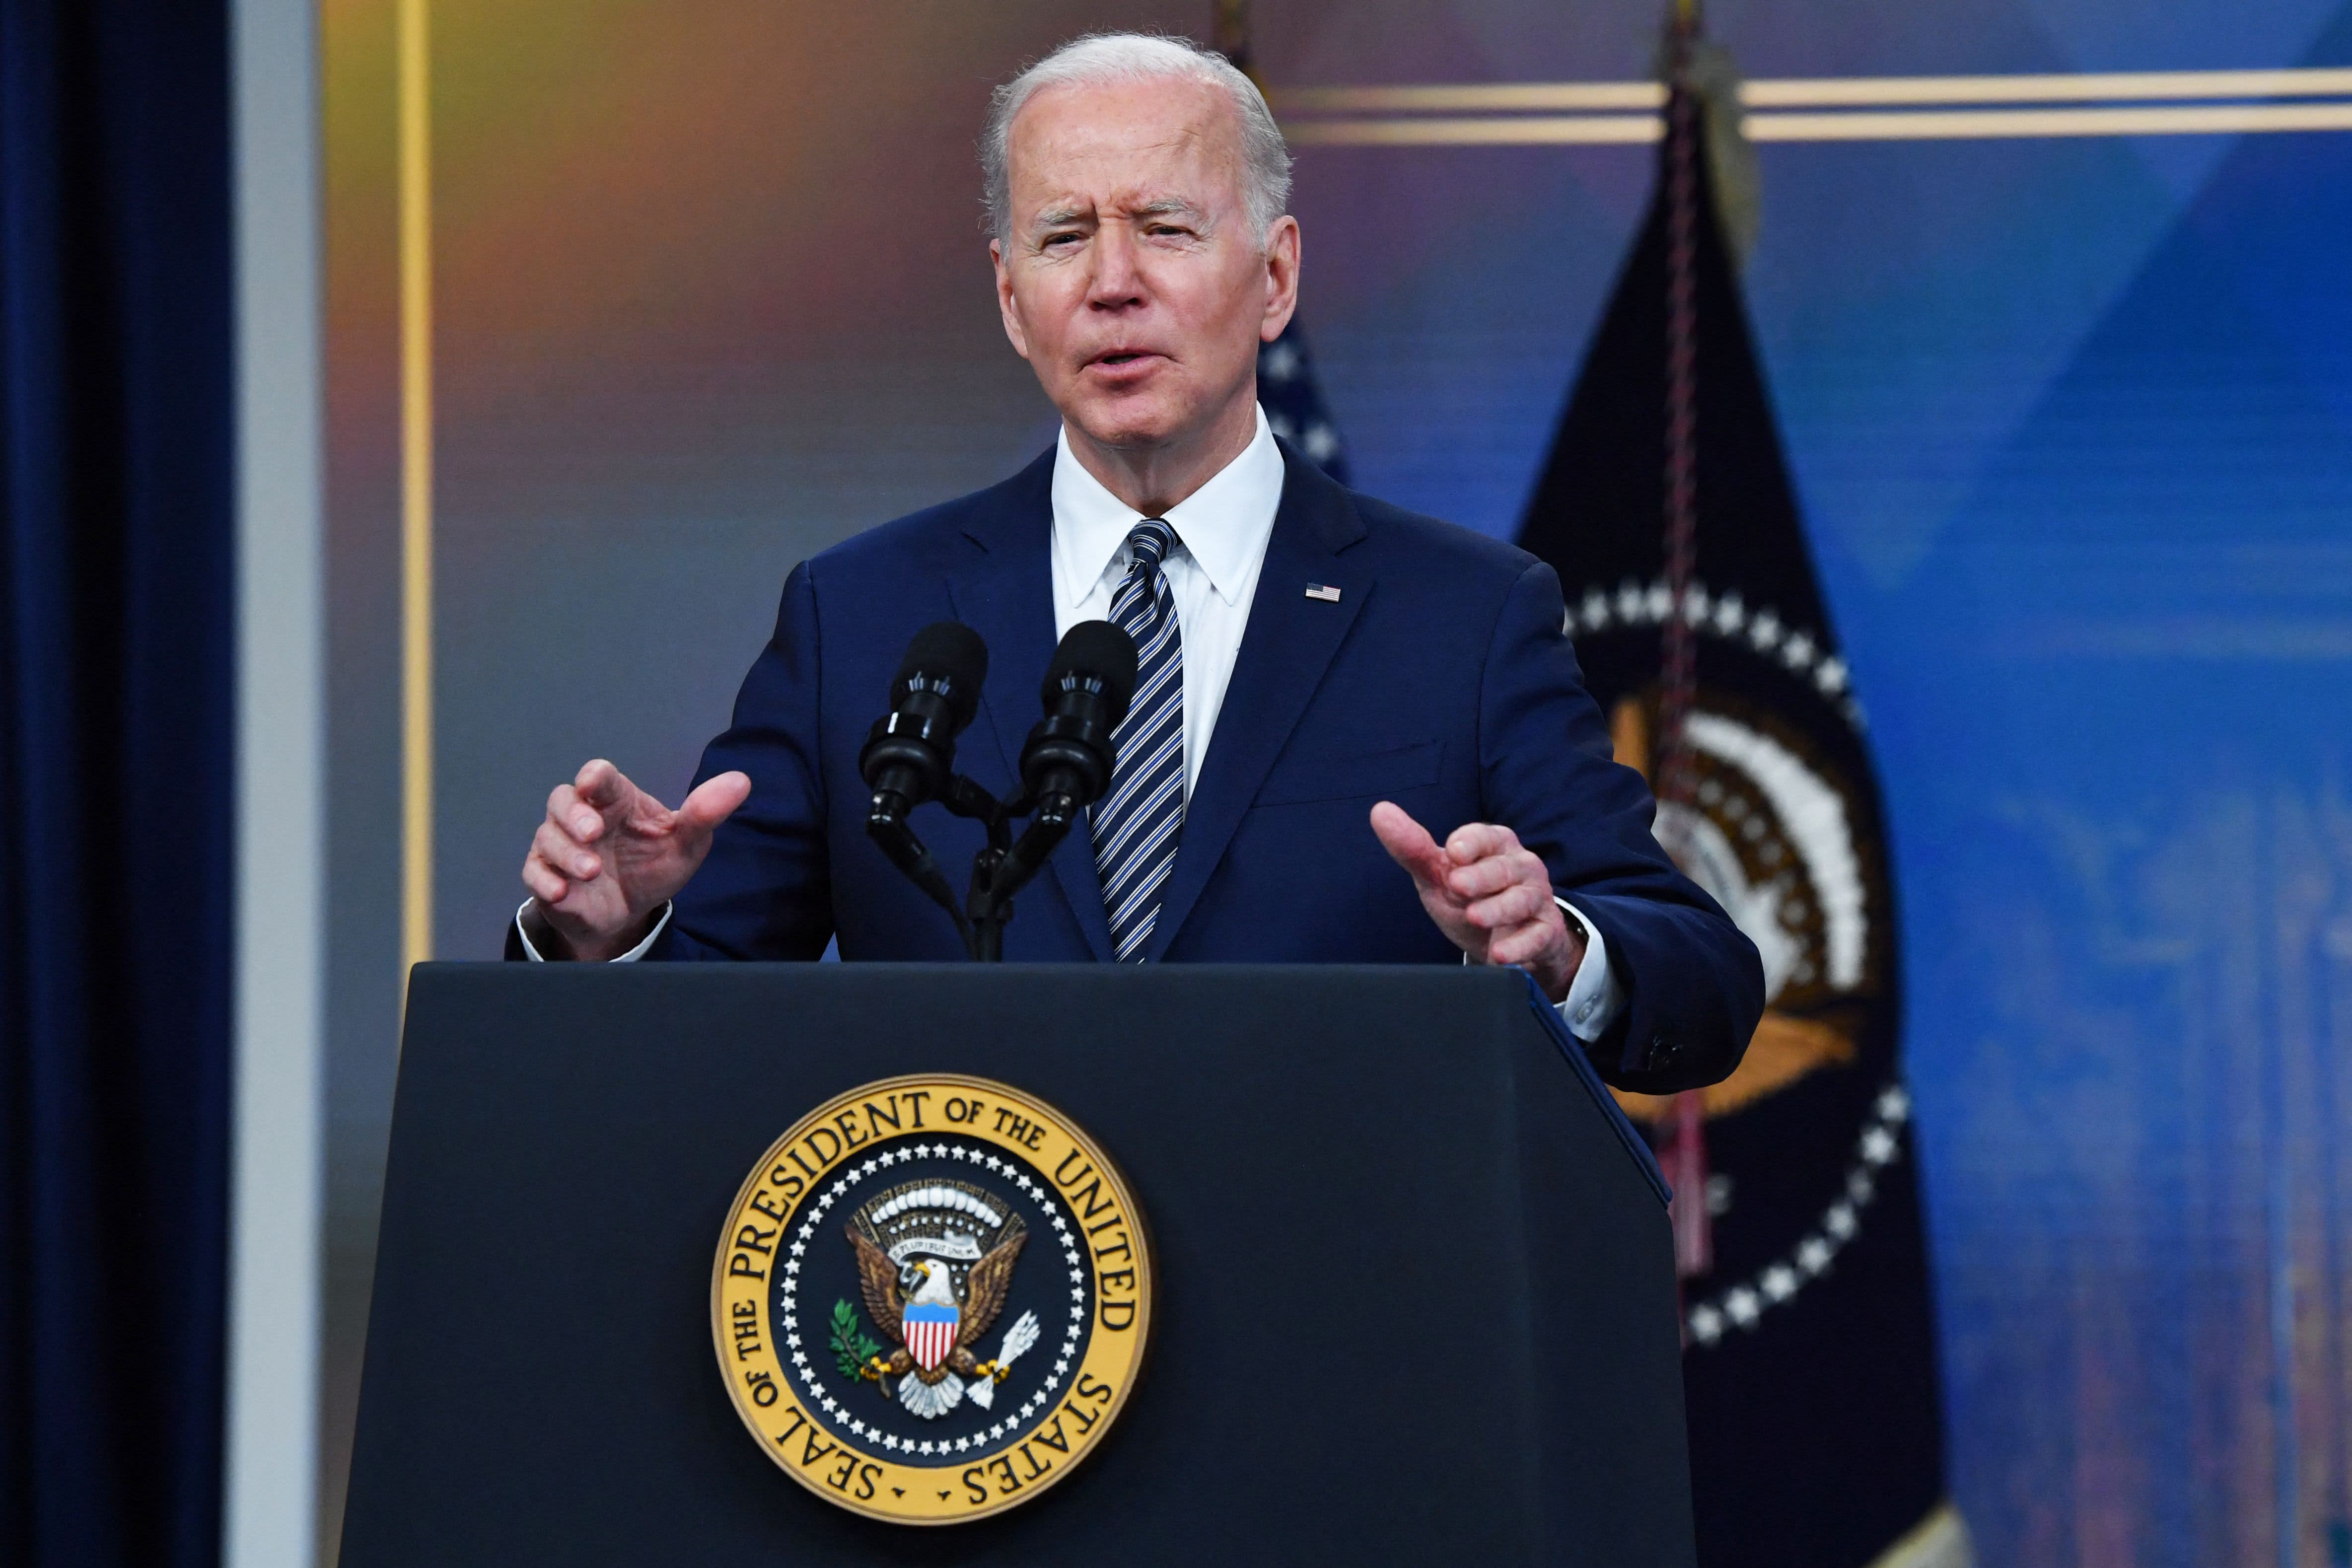 Biden may soon set a floor because oil prices are sinking.  That's good for our energy